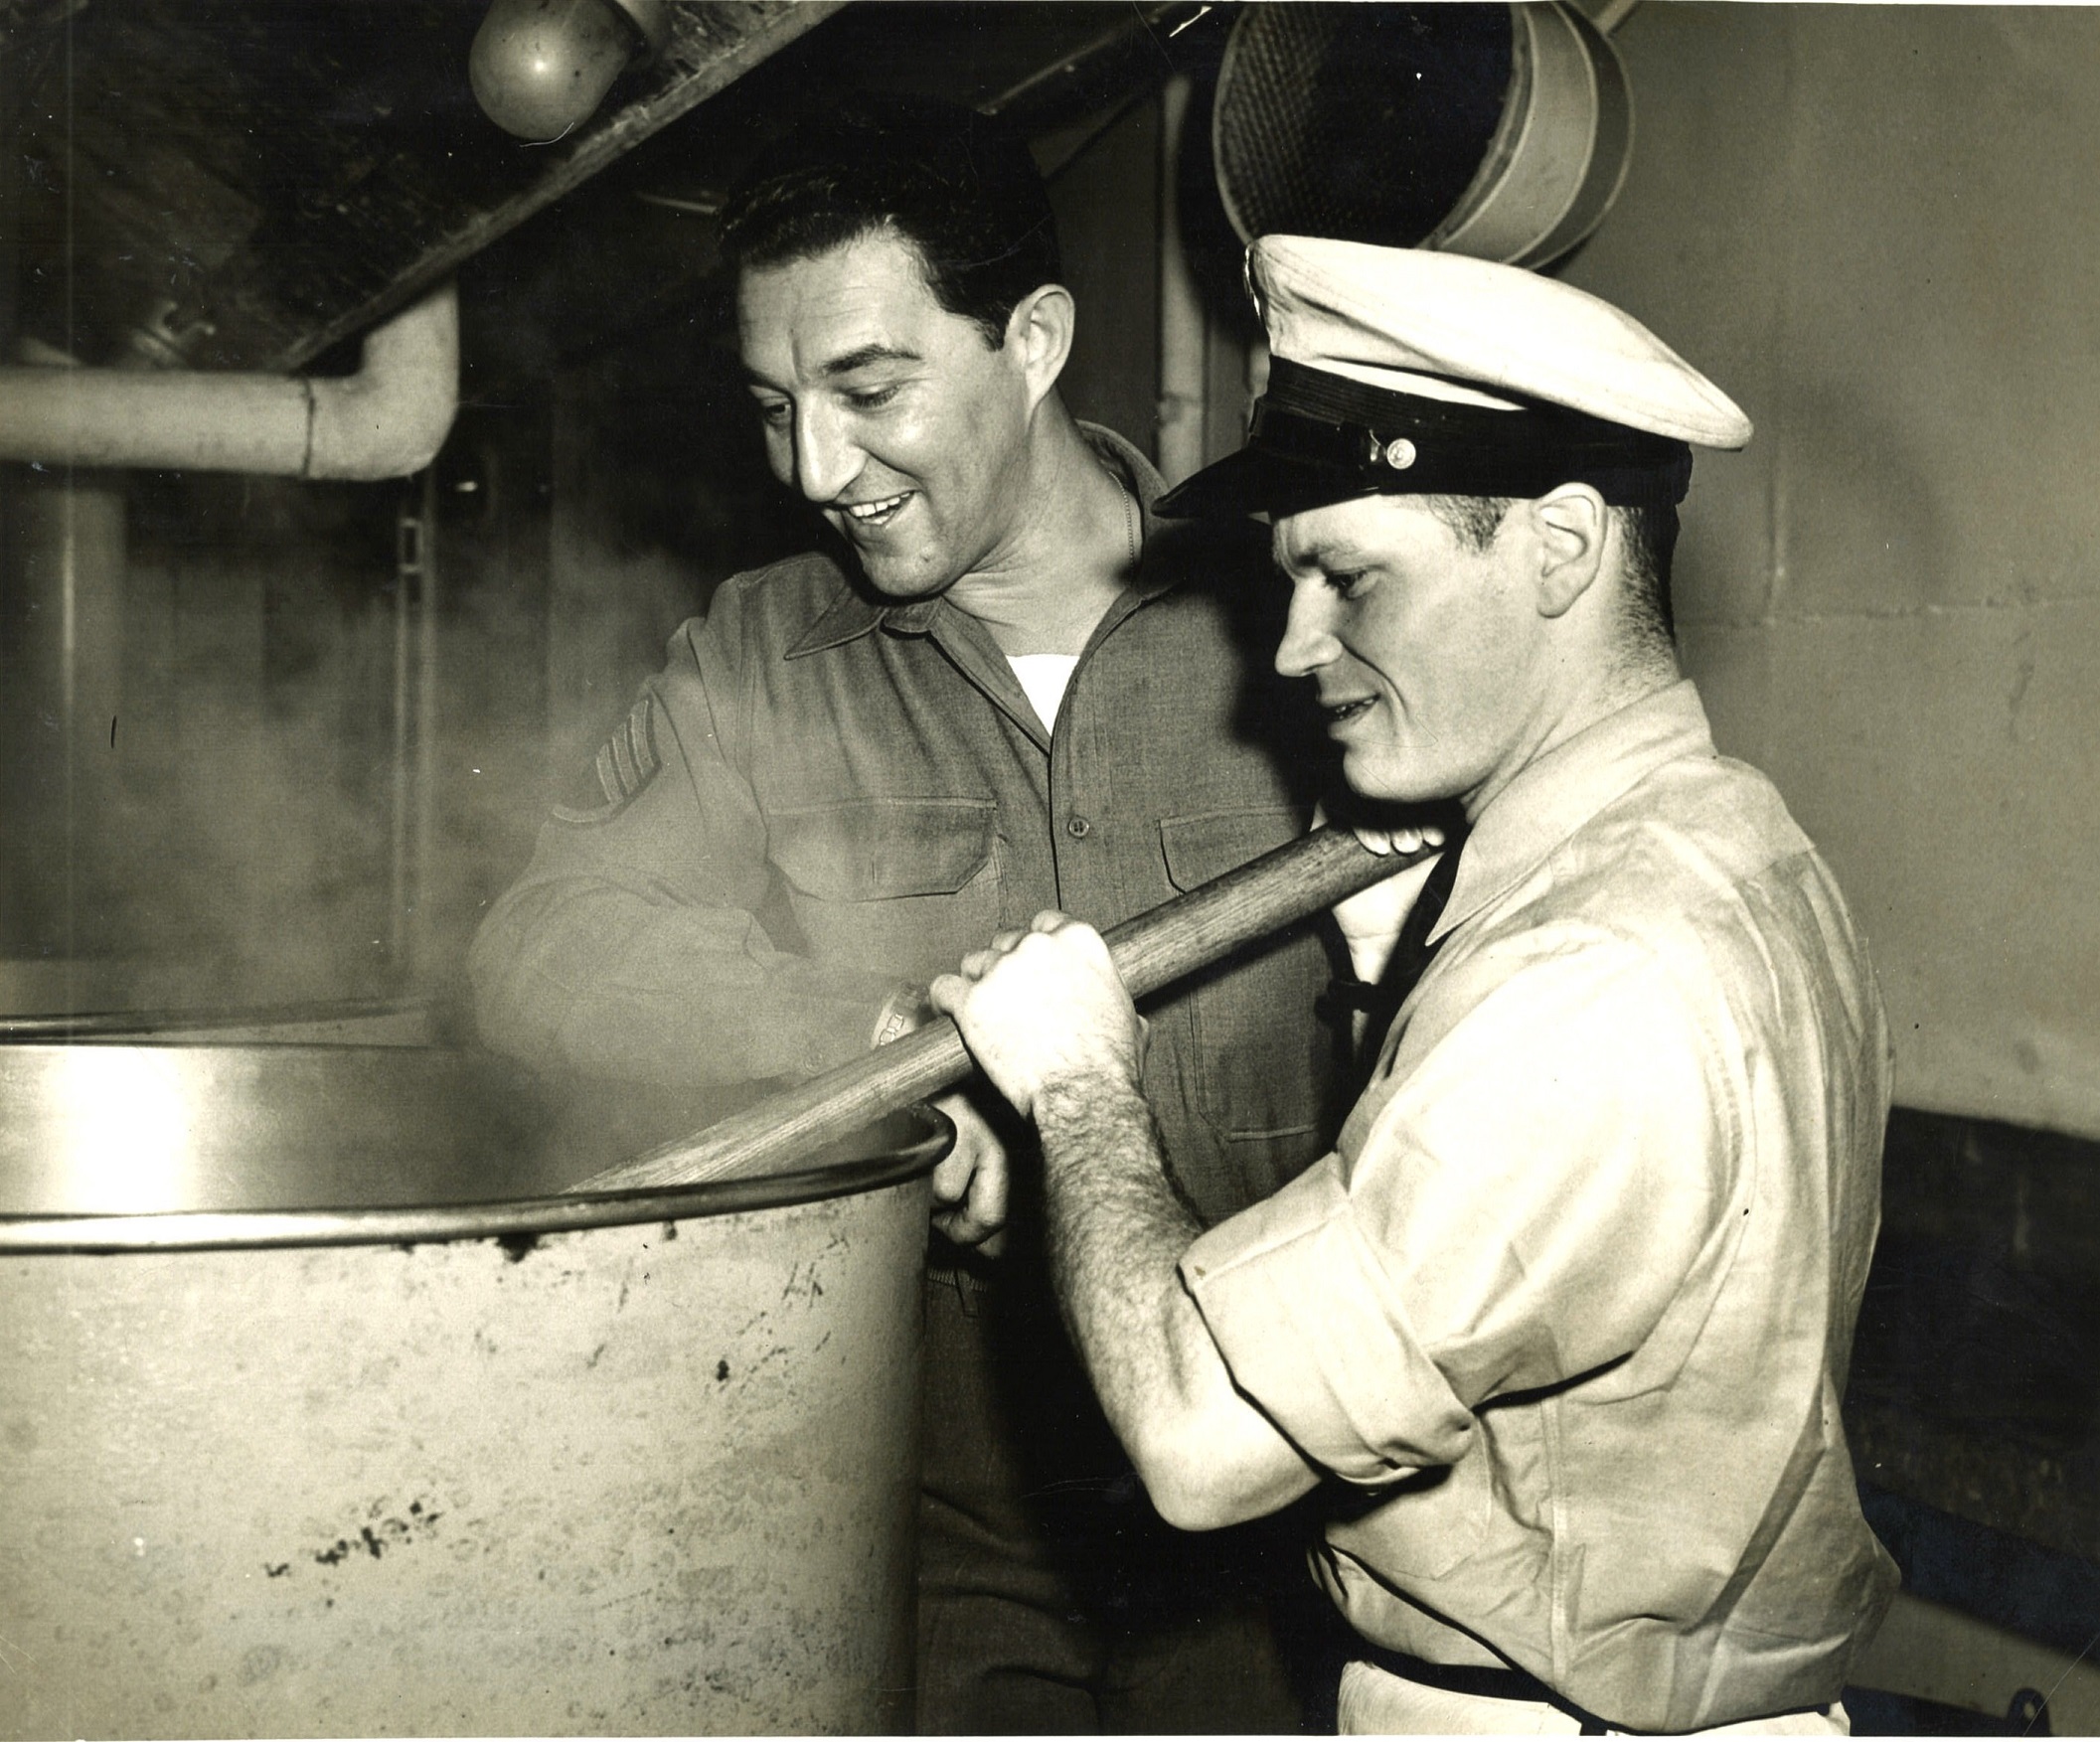 6.	Chief Commissaryman Robert Manges using an industrial-size cauldron in Wakefield’s galley with Army sergeant observing. (Courtesy of Robert Manges)